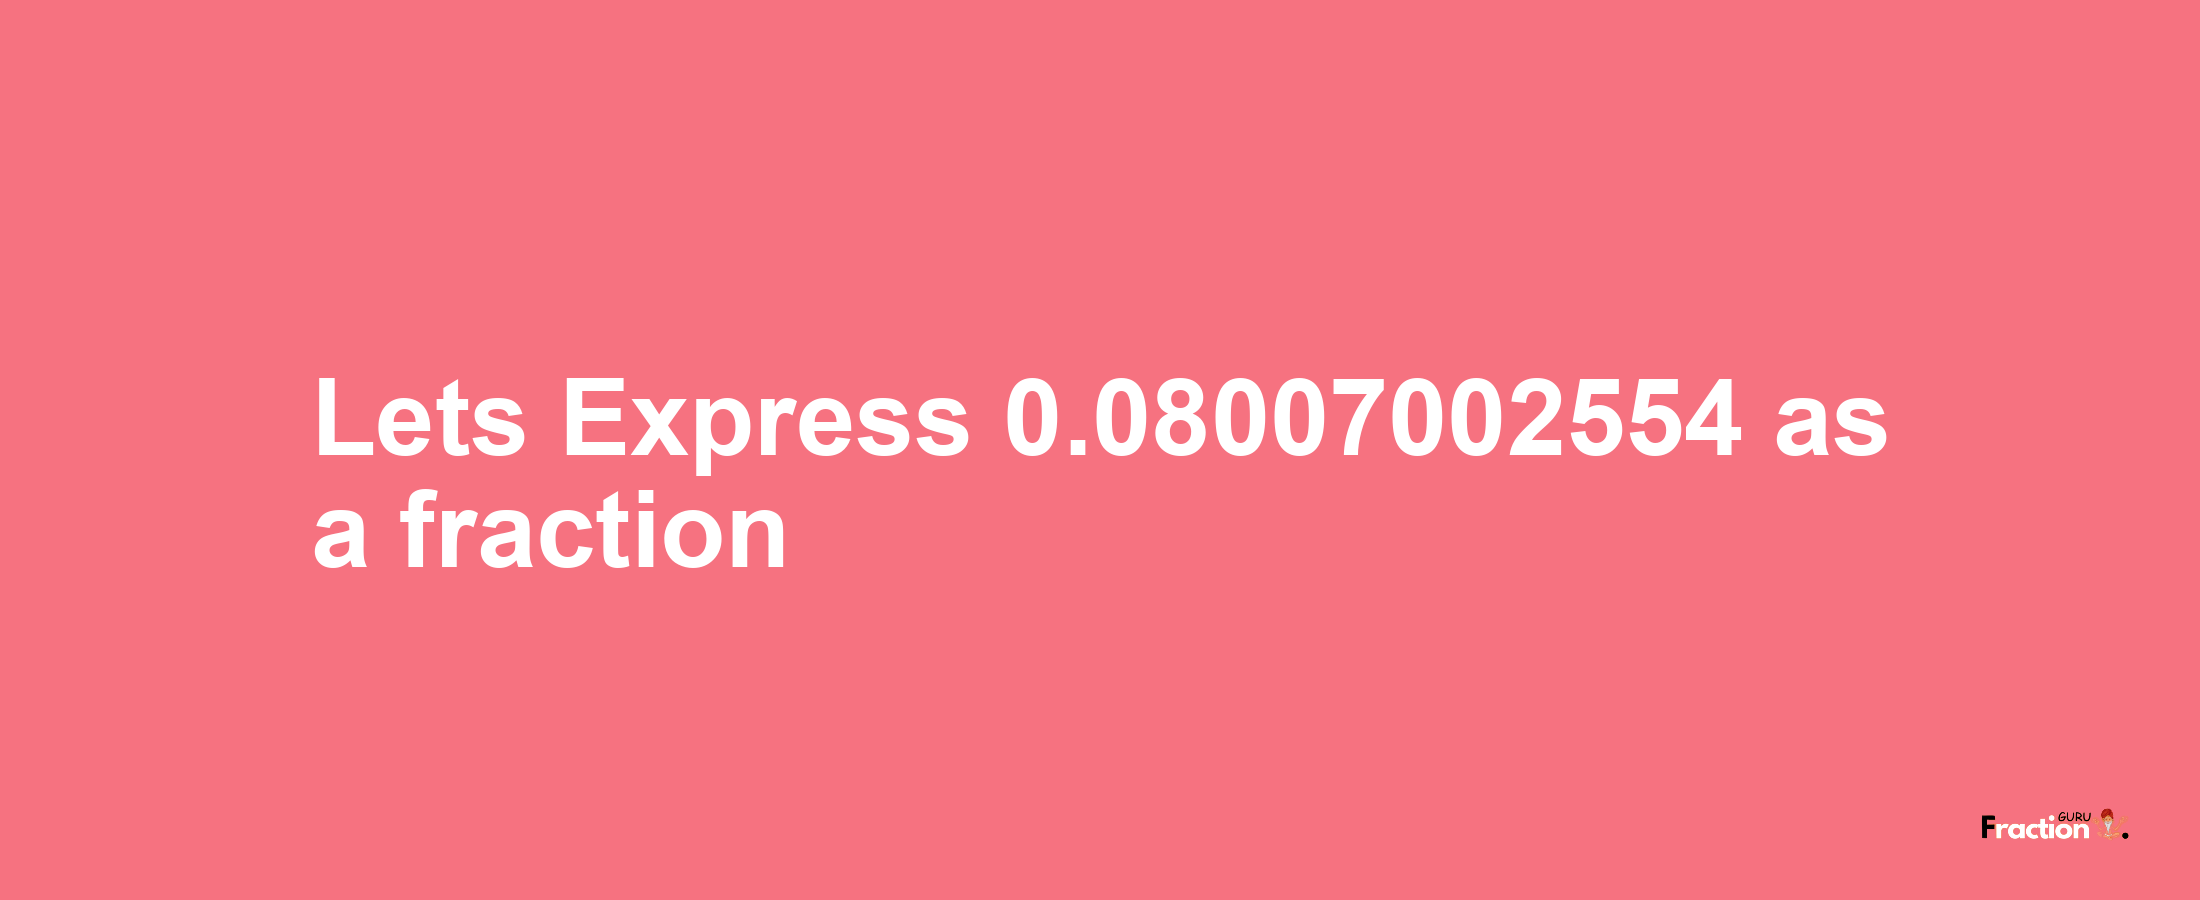 Lets Express 0.08007002554 as afraction